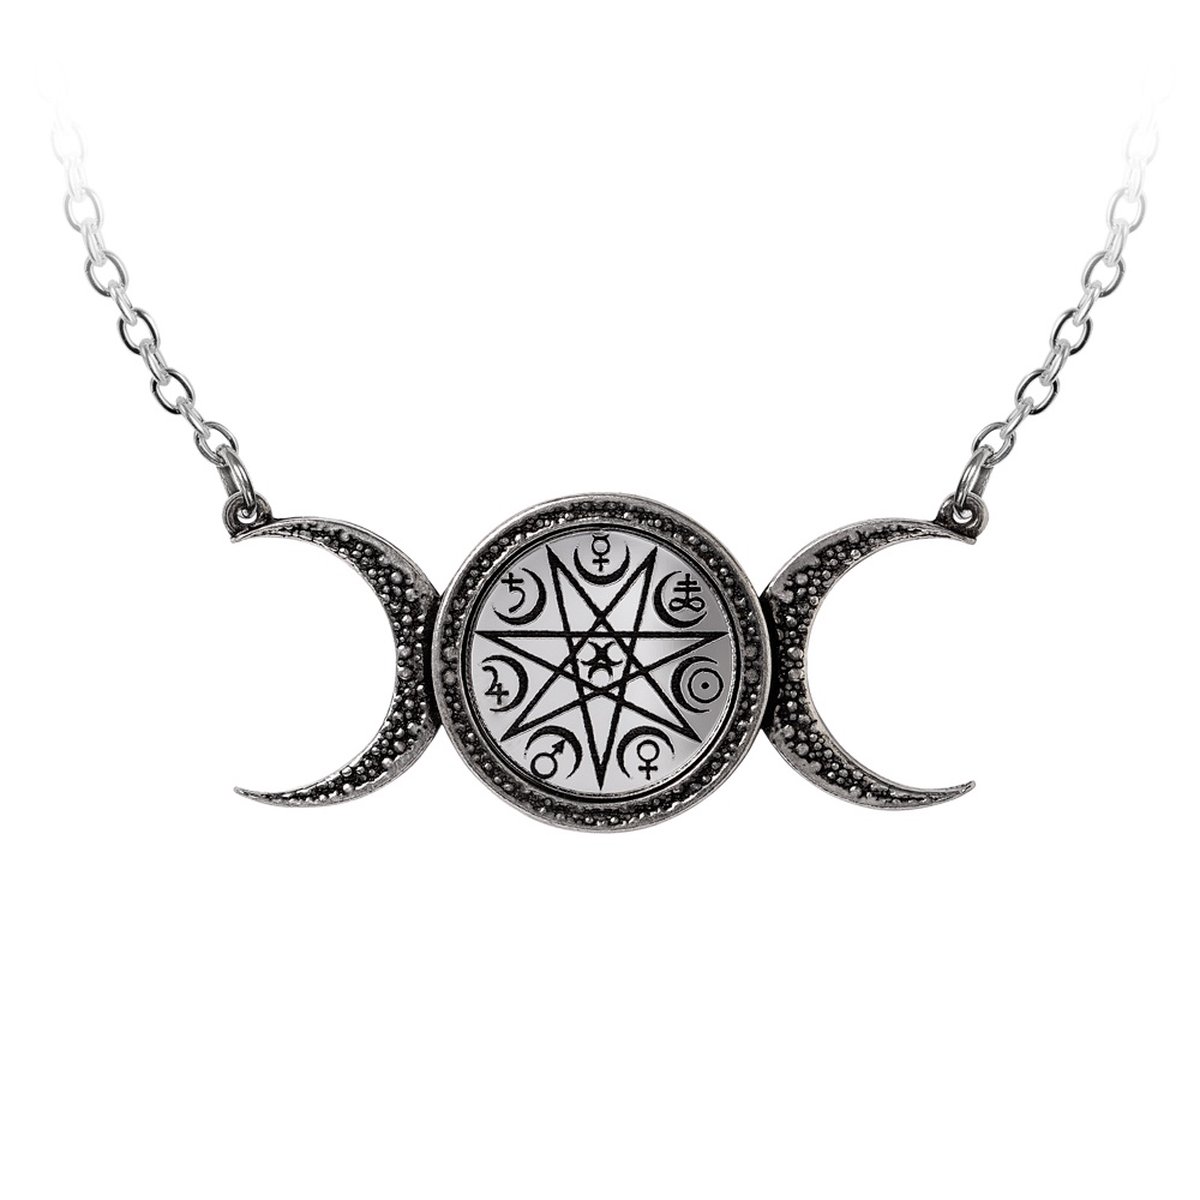 Alchemy - The Magical Phase Ketting - Zilverkleurig